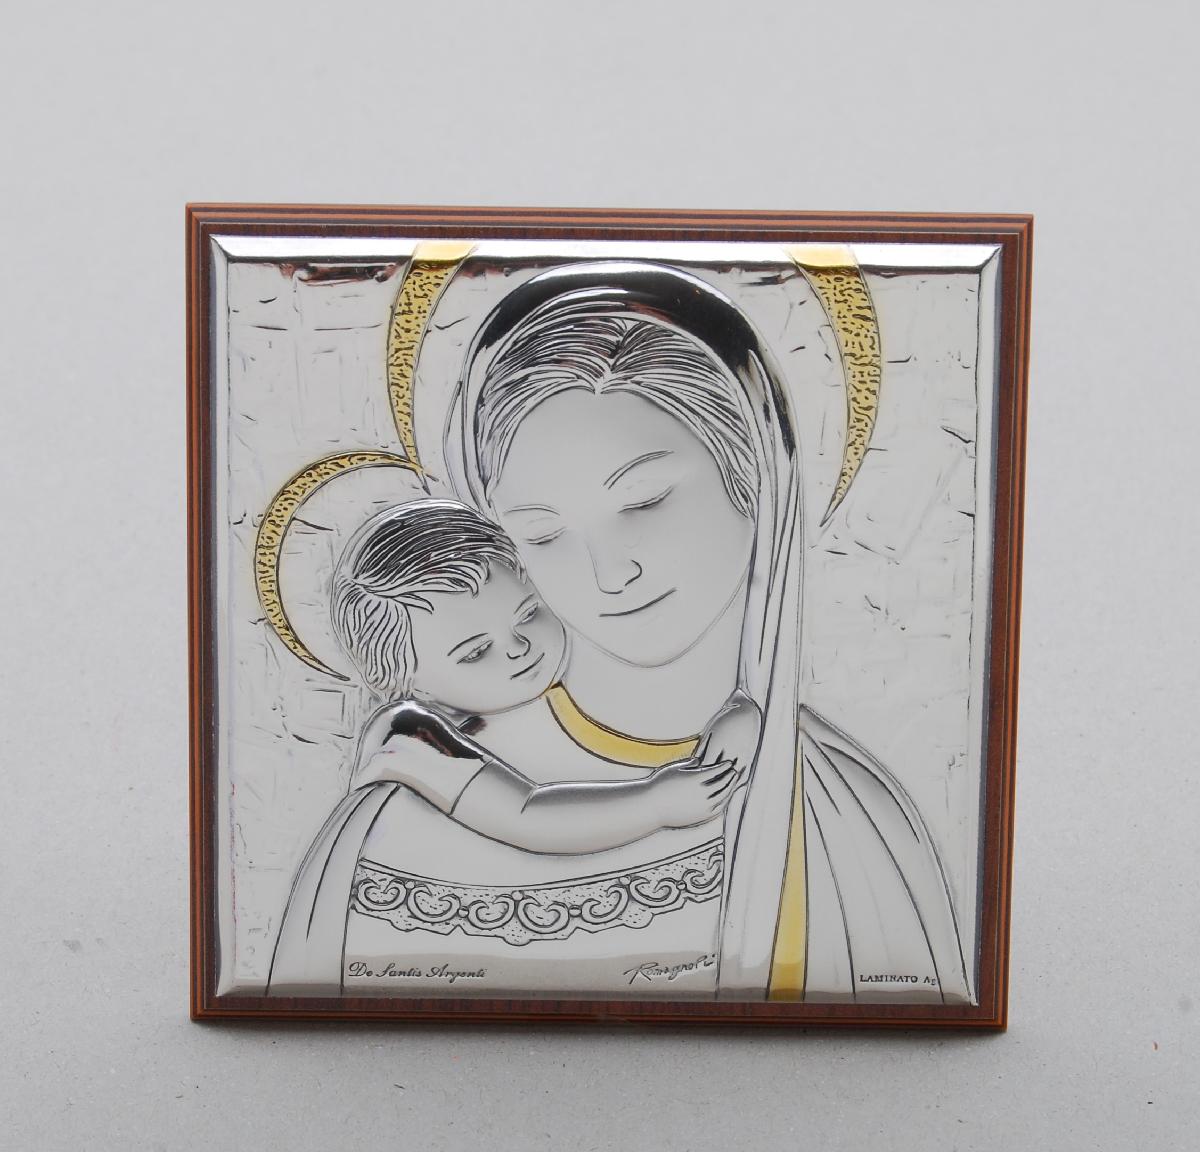 Virgin square sterling silver icon 5cm - Vierge argent massif carree